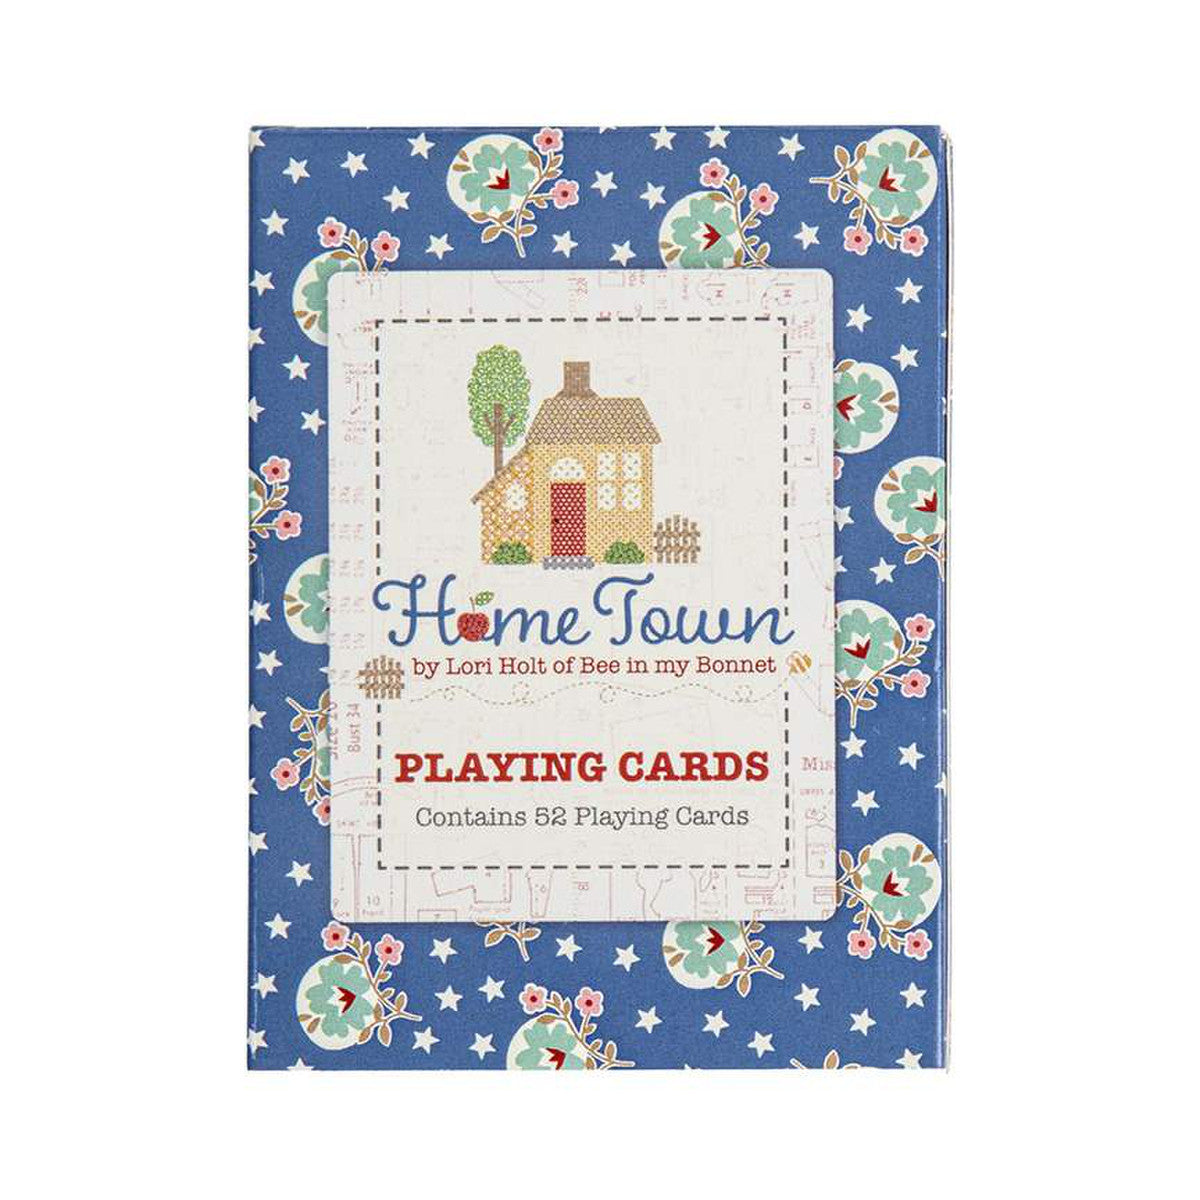 Home Town Playing Cards by Lori Holt - ST-31086